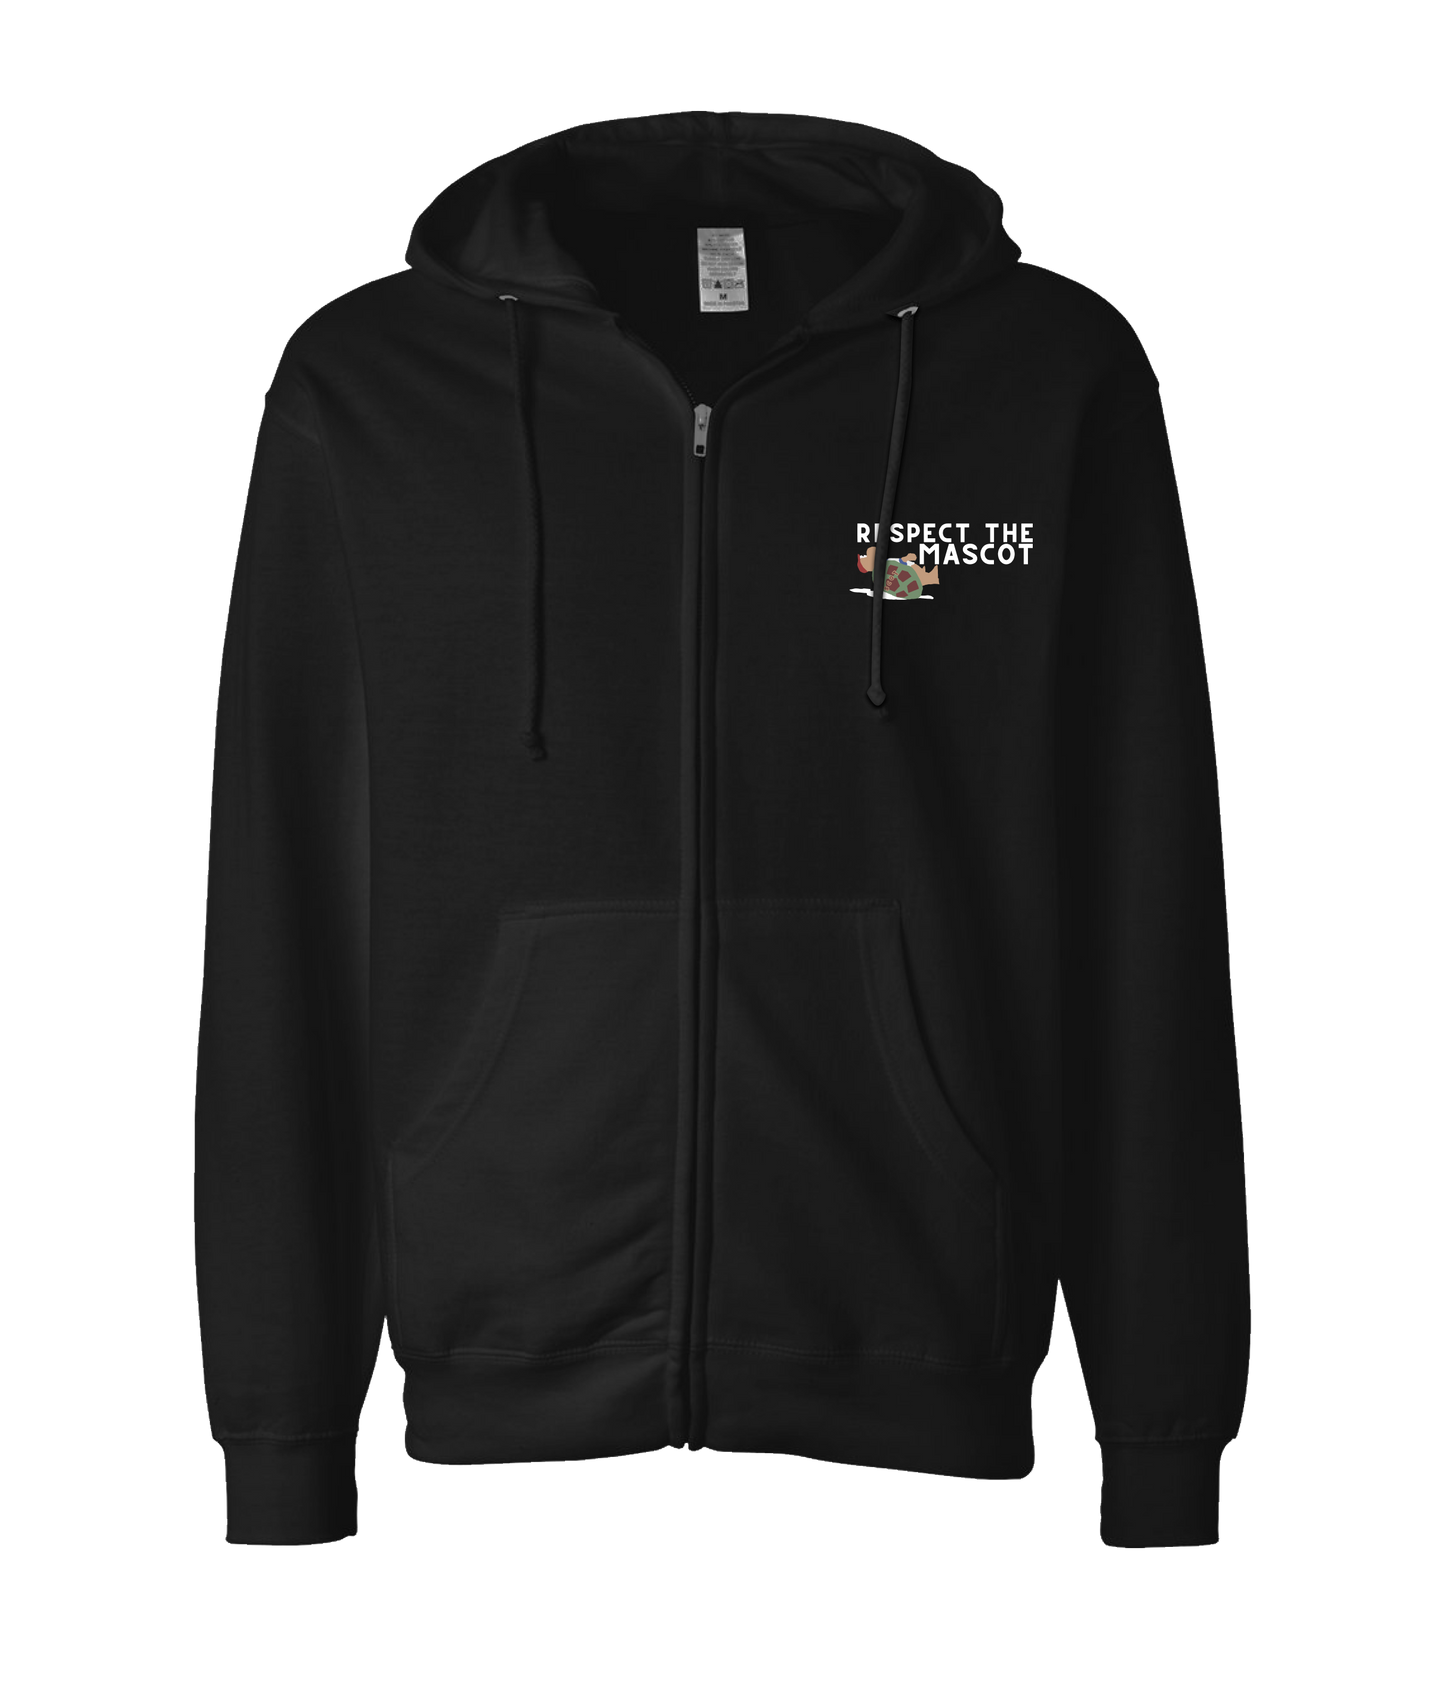 The Philly Captain's Merch is Fire - RESPECT THE MASCOT - Black Zip Up Hoodie